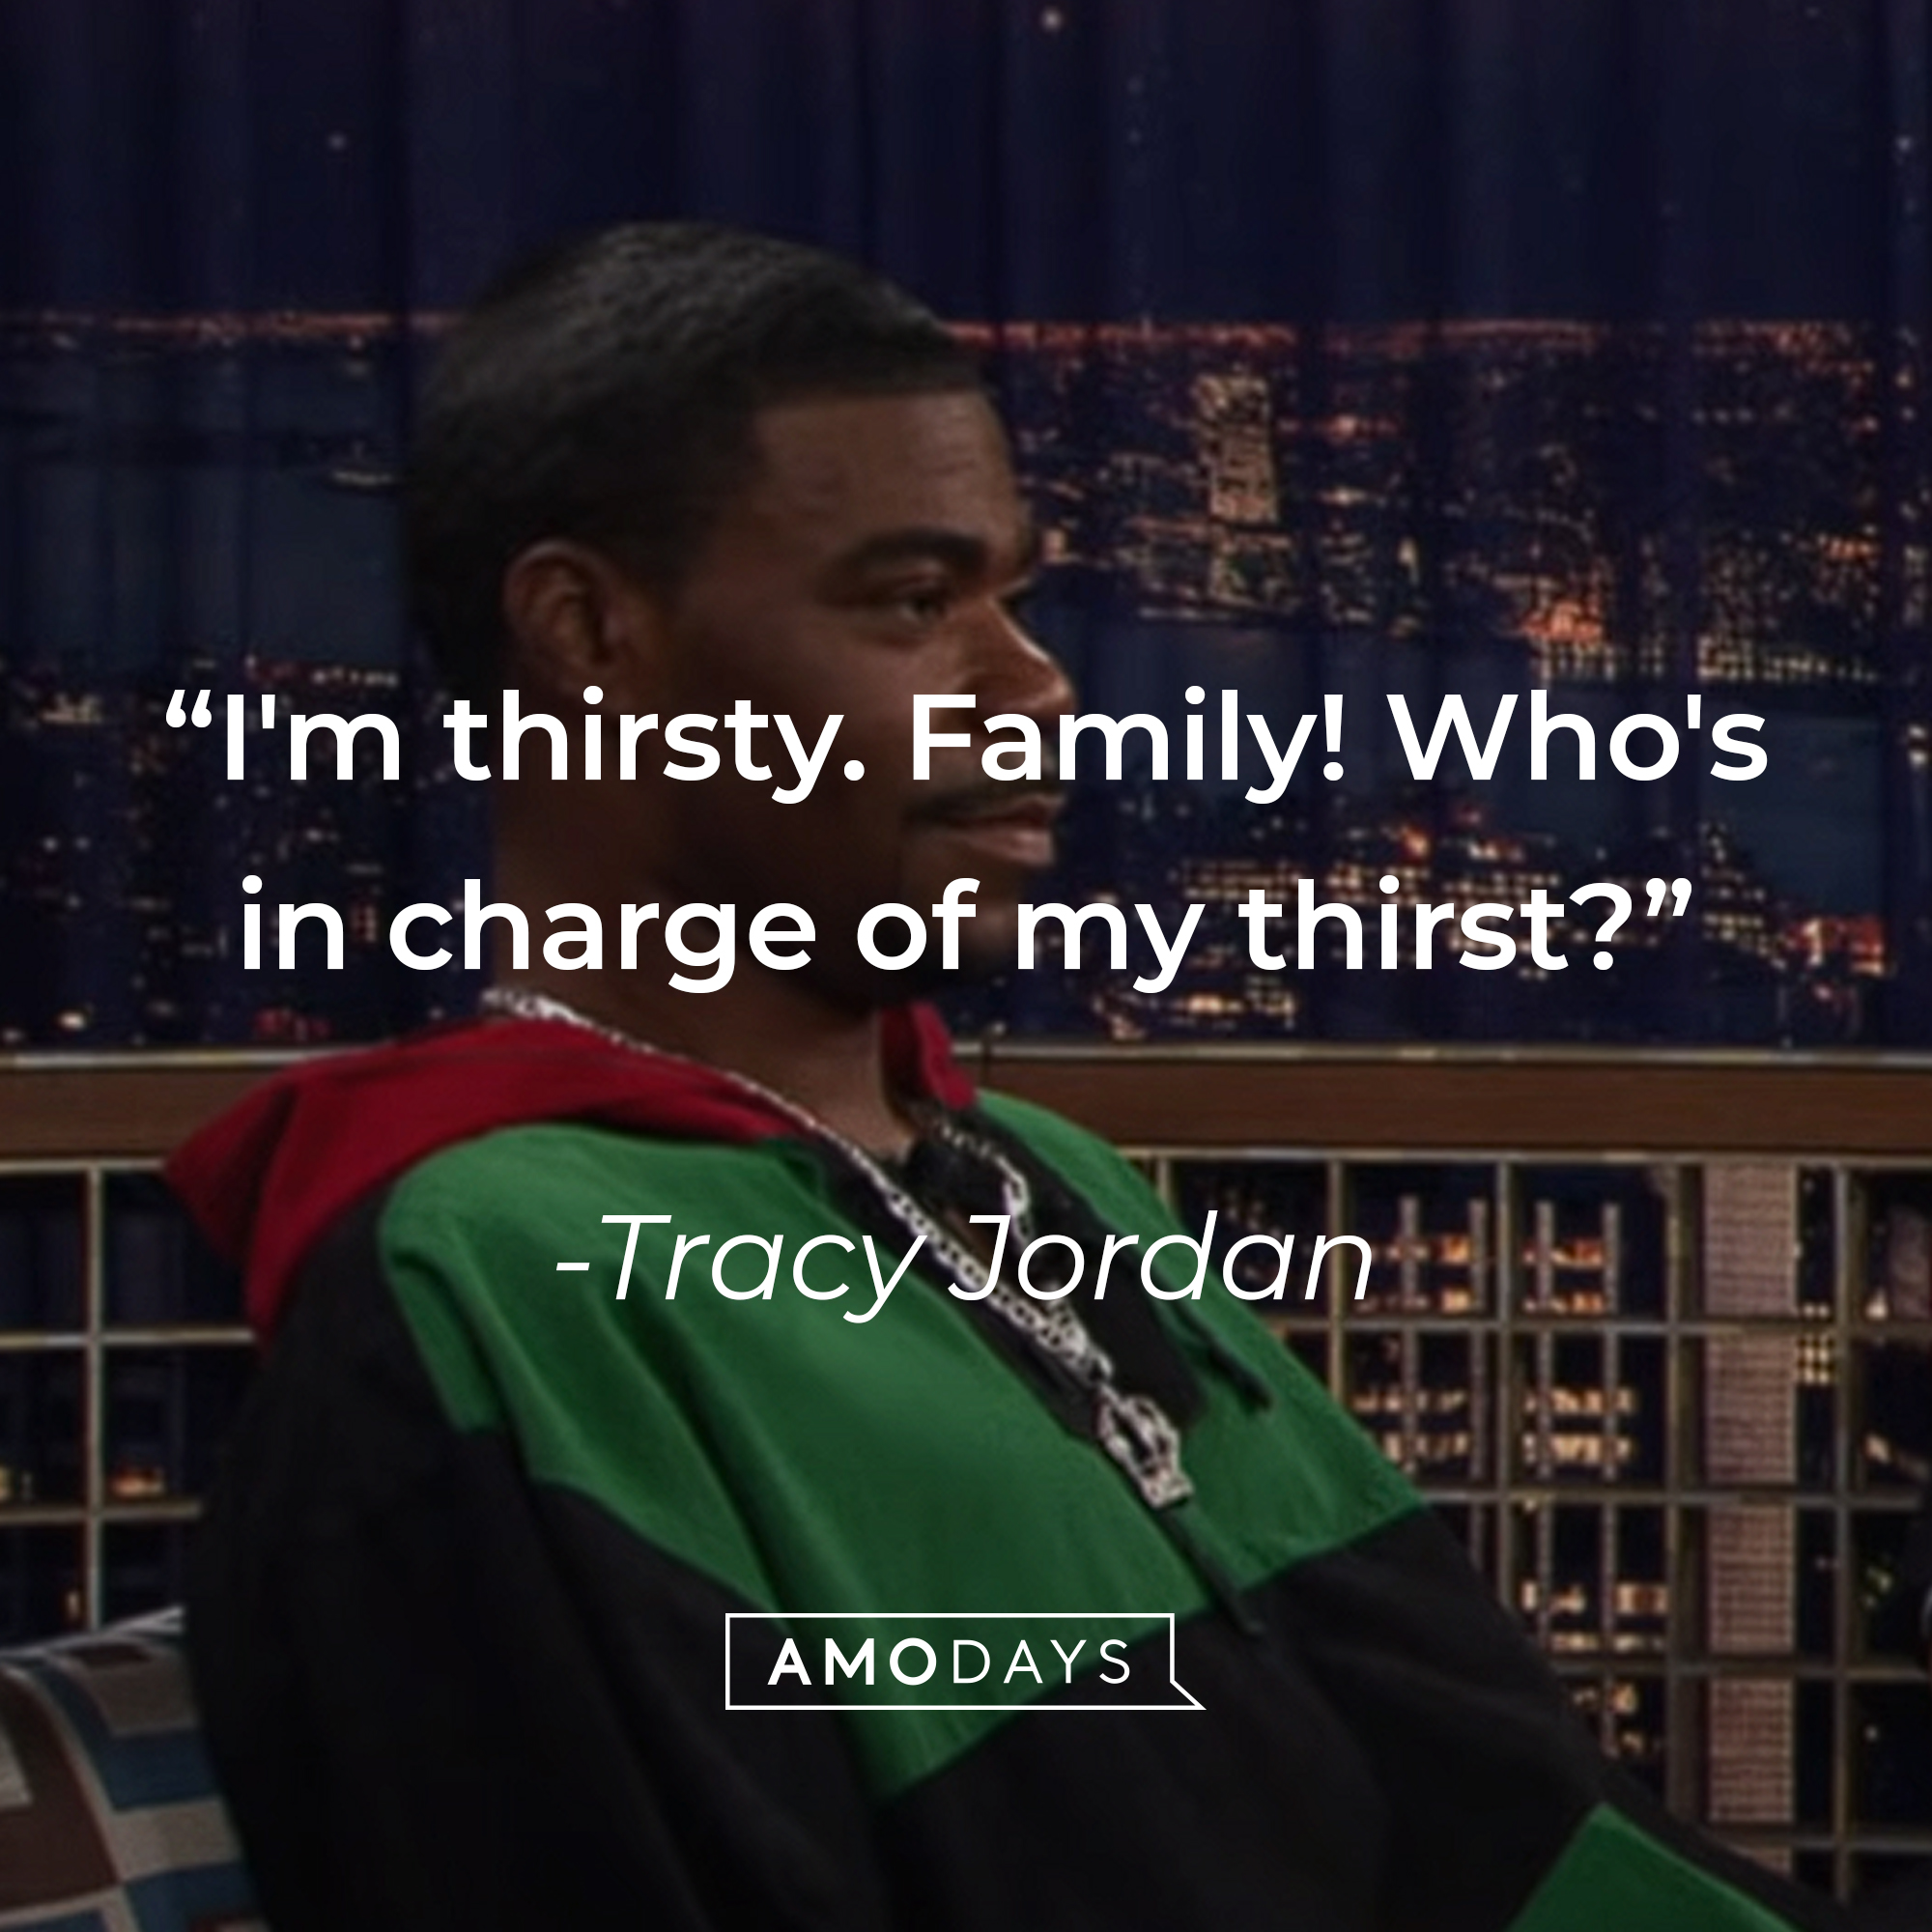 Tracy Jordan's quote, "I'm thirsty. Family! Who's in charge of my thirst?" | Source: facebook.com/30RockTV